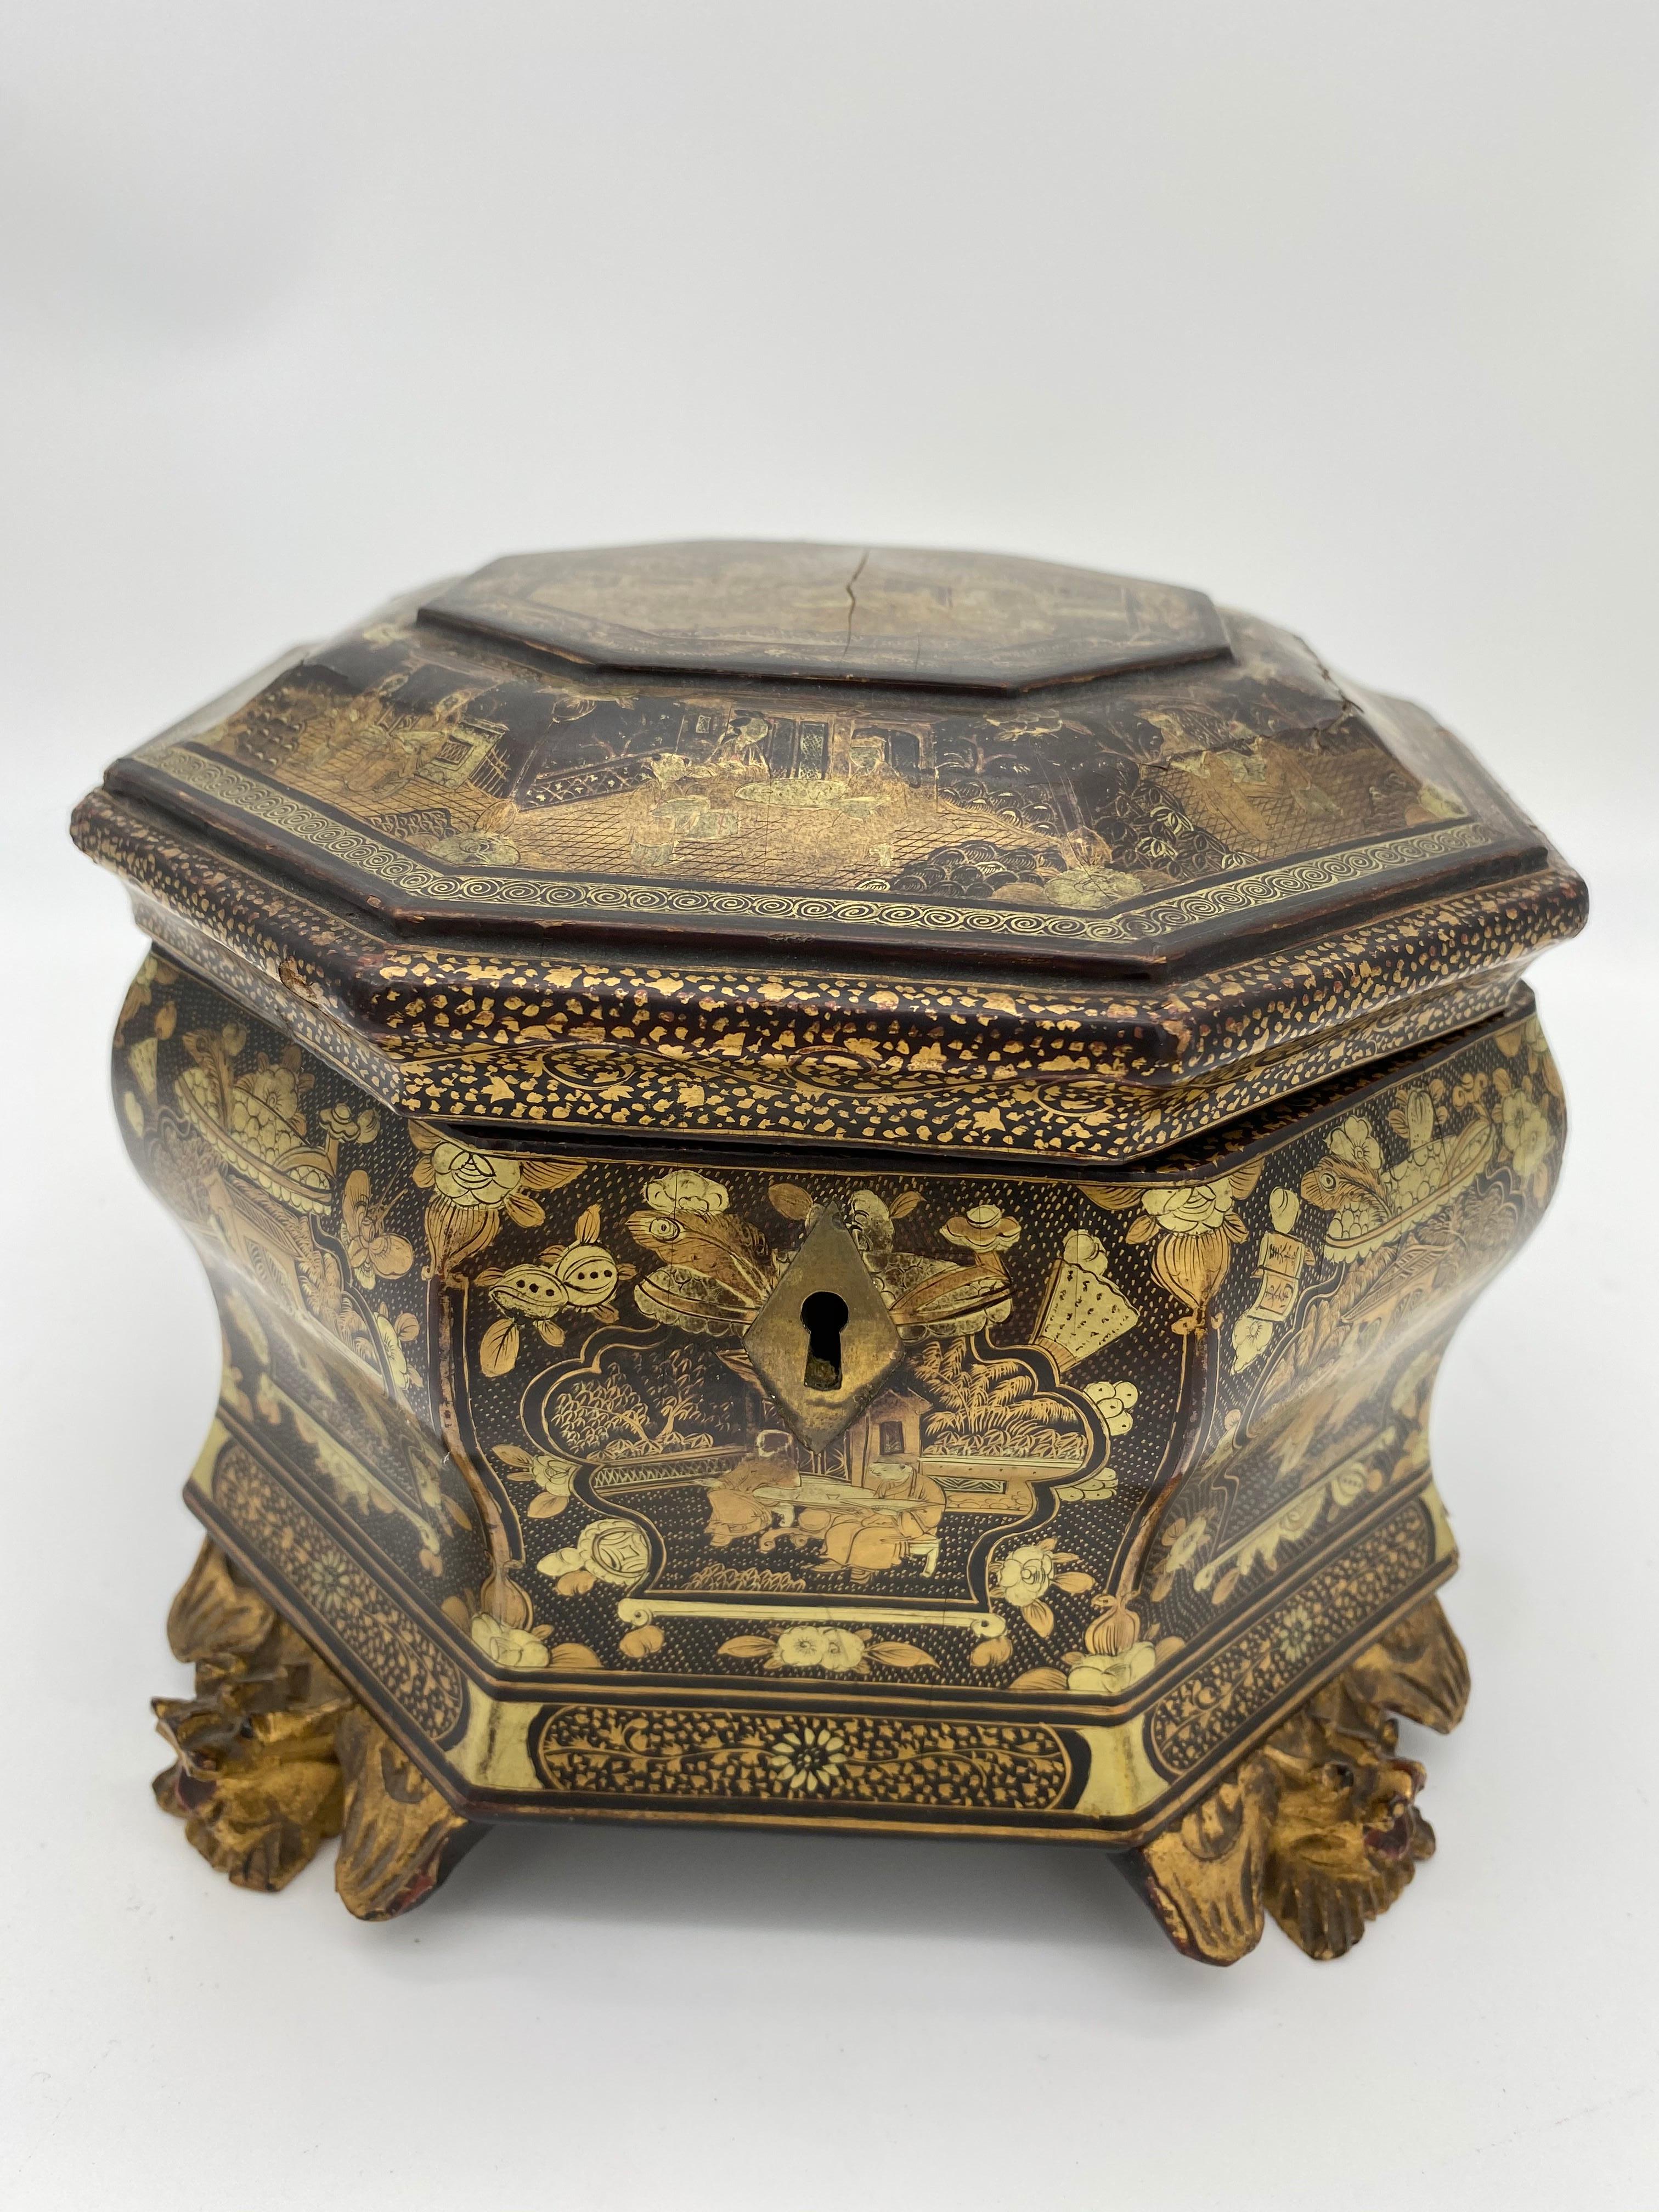 19th century chinoiserie hexagonal-form lift-lid gilt-decorated black lacquer Chinese tea caddy, small and beautiful piece.